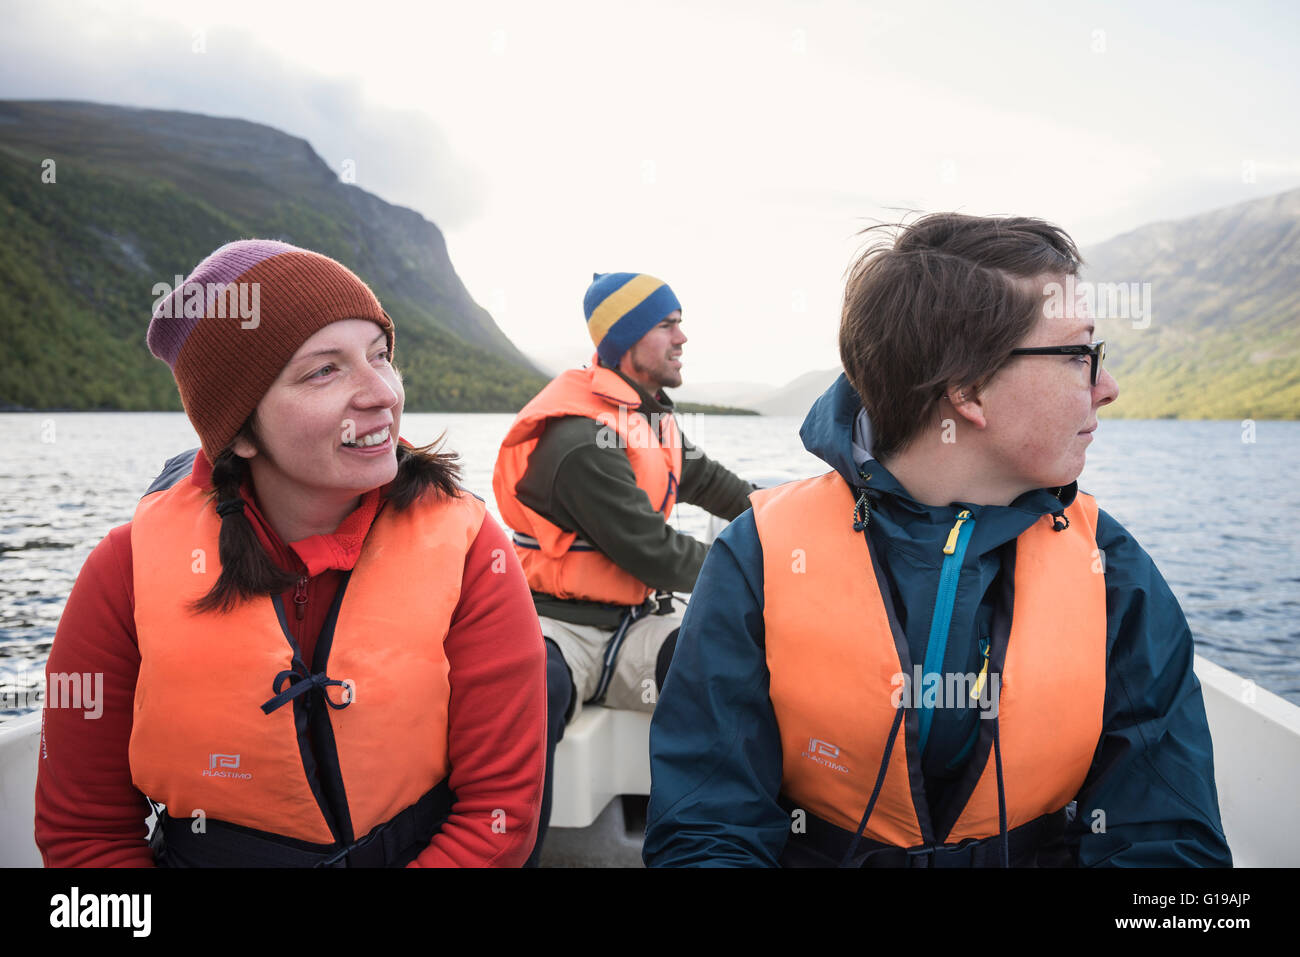 Female hikers on STF water taxi across lake Teusajaure, Kungsleden trail, Lapland, Sweden Stock Photo